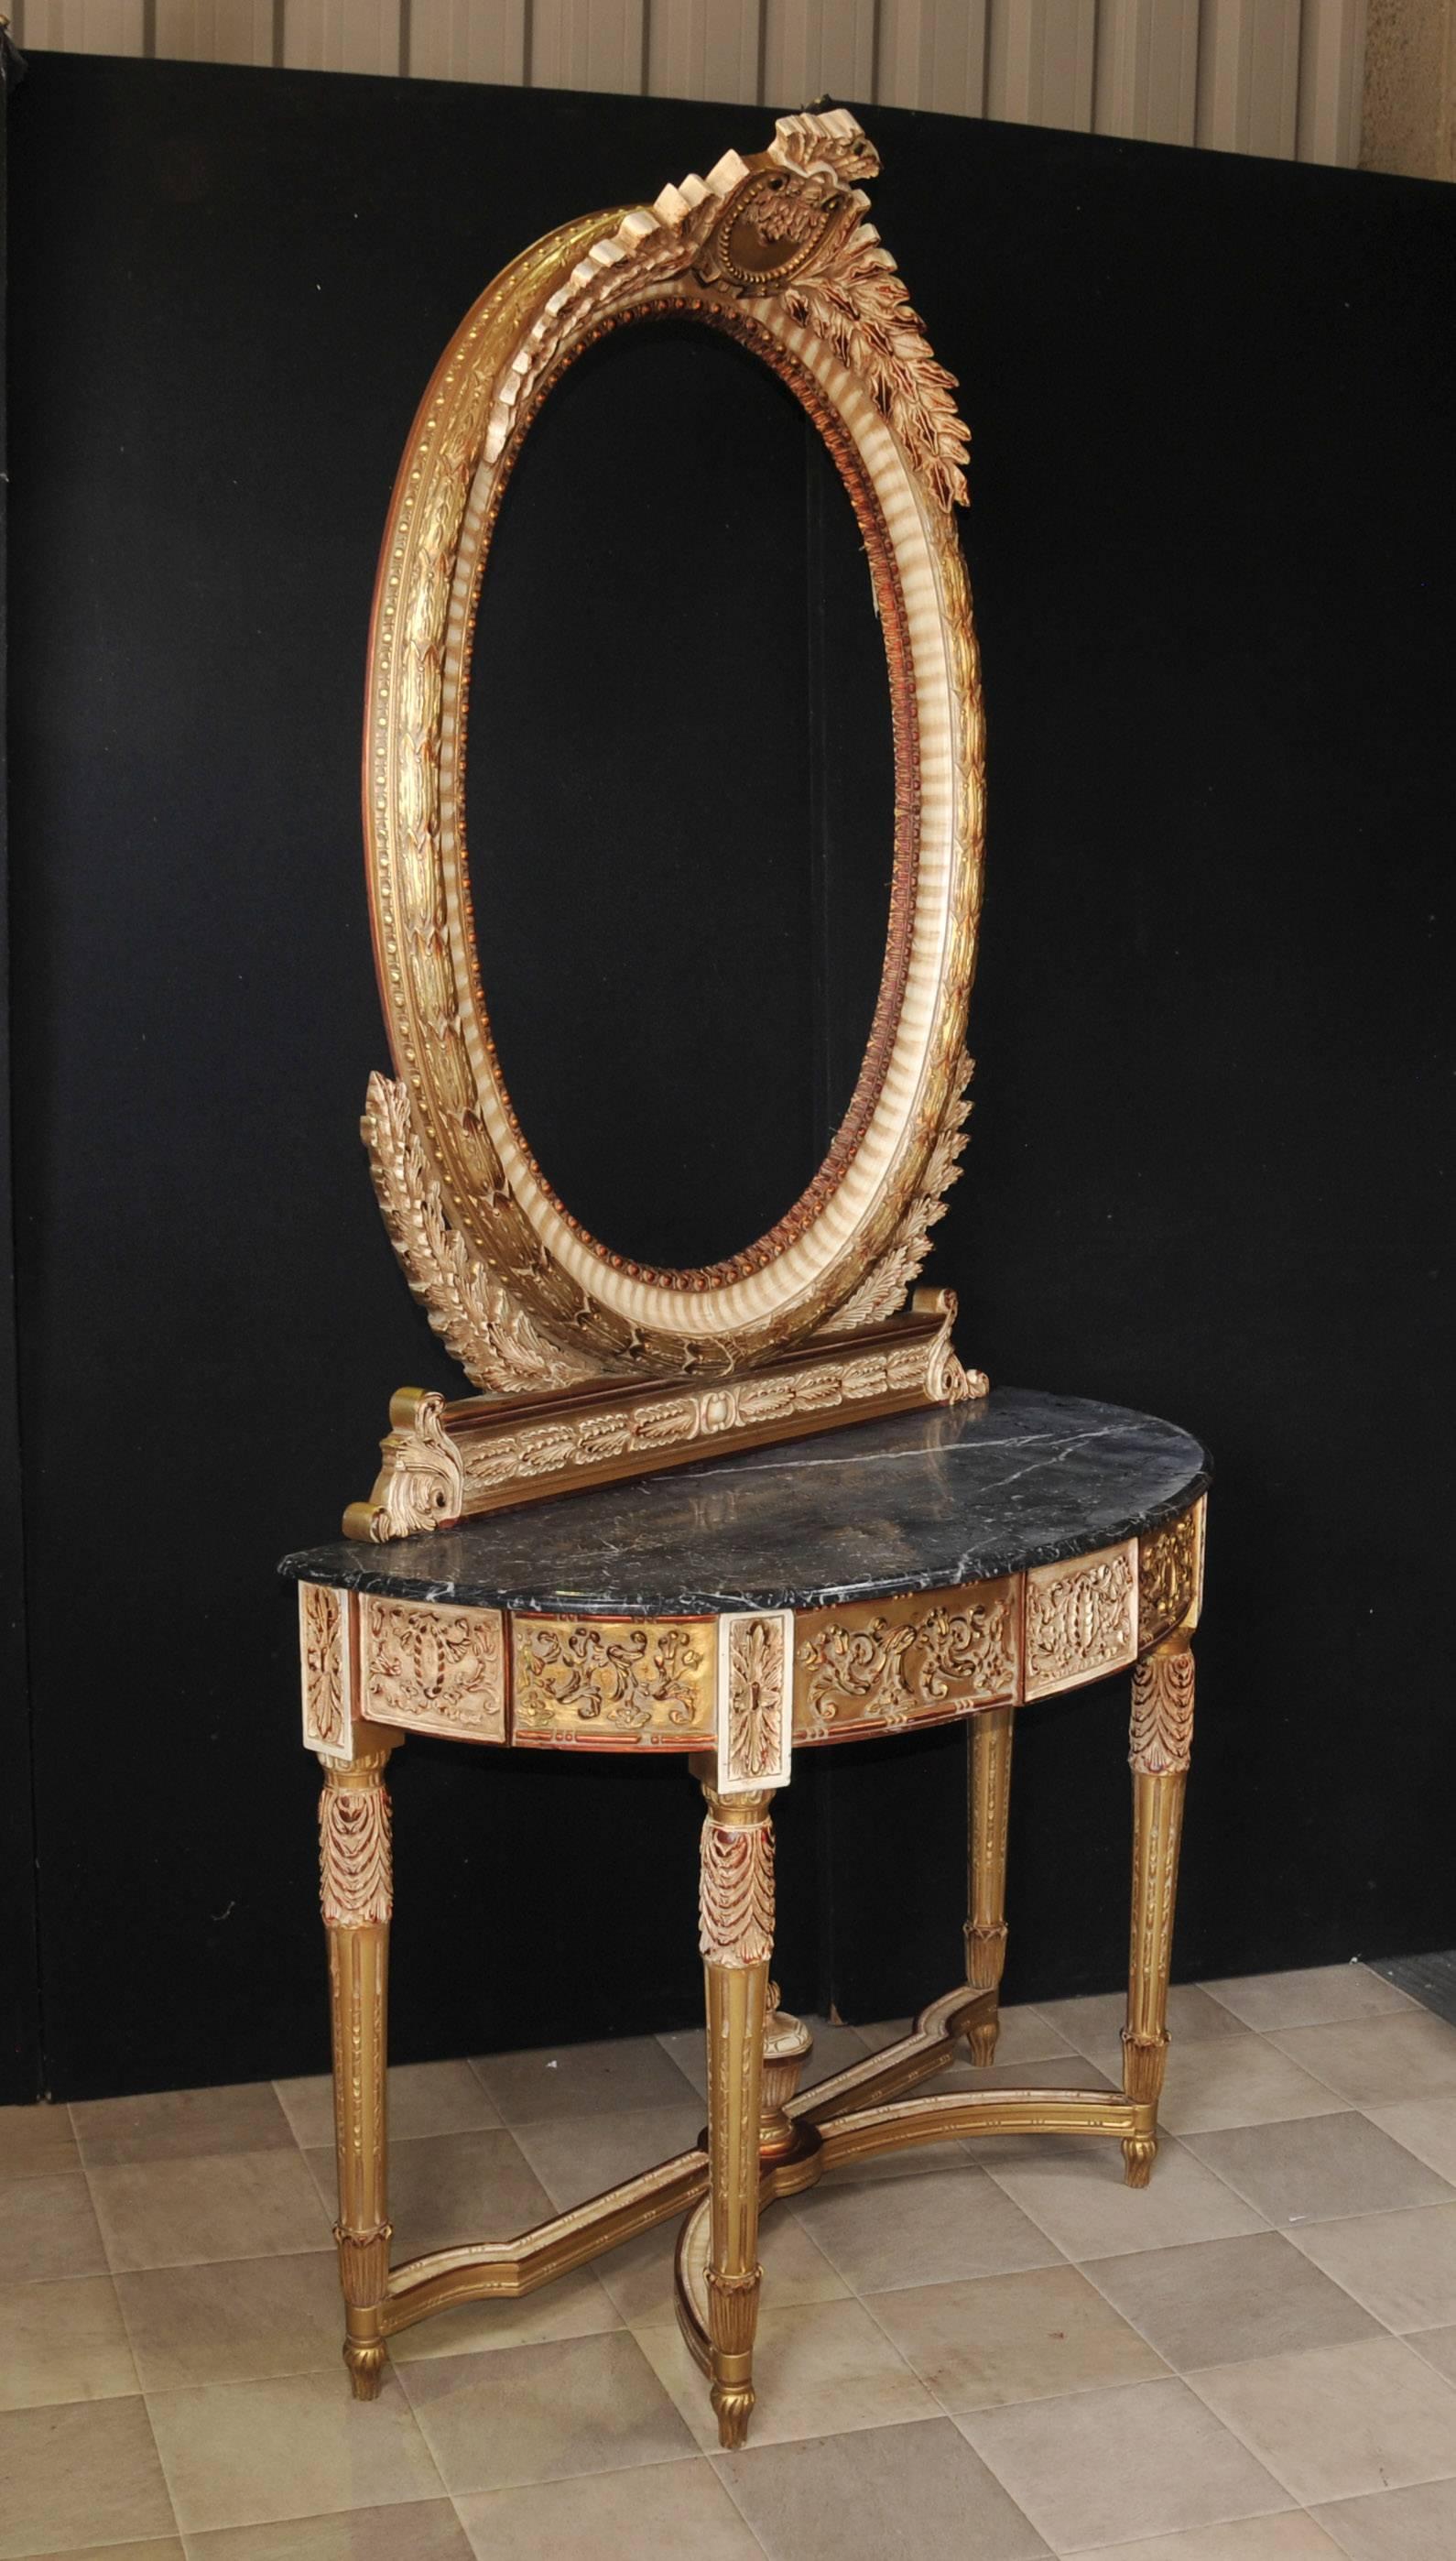 Gorgeous empire style mirror and console table set.
Good size to this, perfect for an entrance hall or sitting room.
Hand-carved base and mirror frame incredibly ornate and finished in blushed giltwood.
Giltwood has a lovely muted colour scheme,